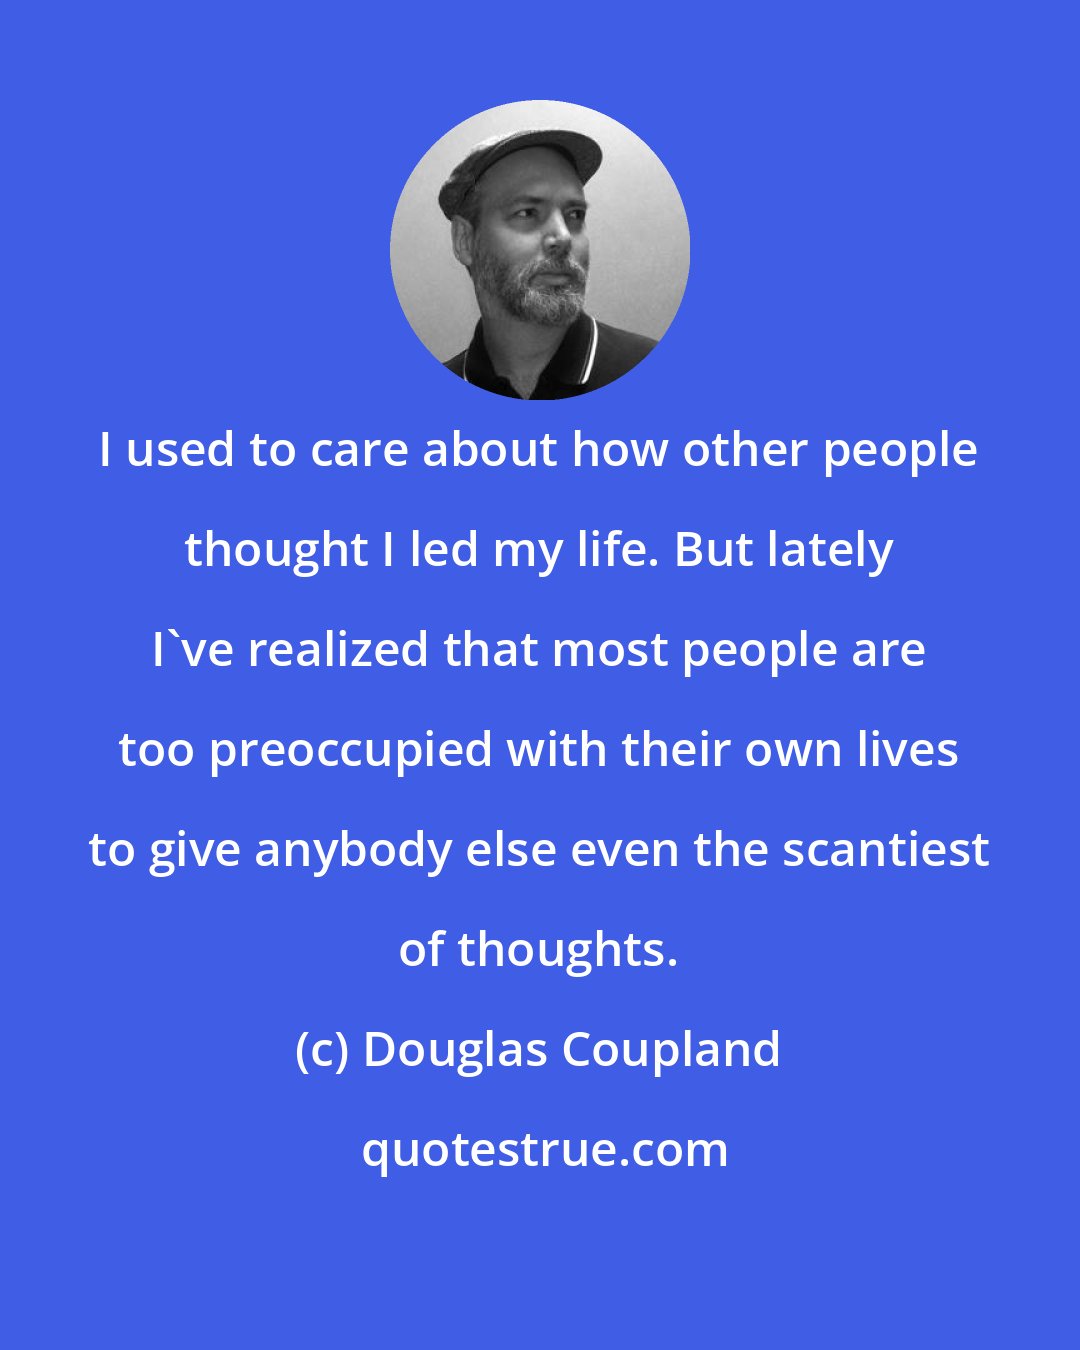 Douglas Coupland: I used to care about how other people thought I led my life. But lately I've realized that most people are too preoccupied with their own lives to give anybody else even the scantiest of thoughts.